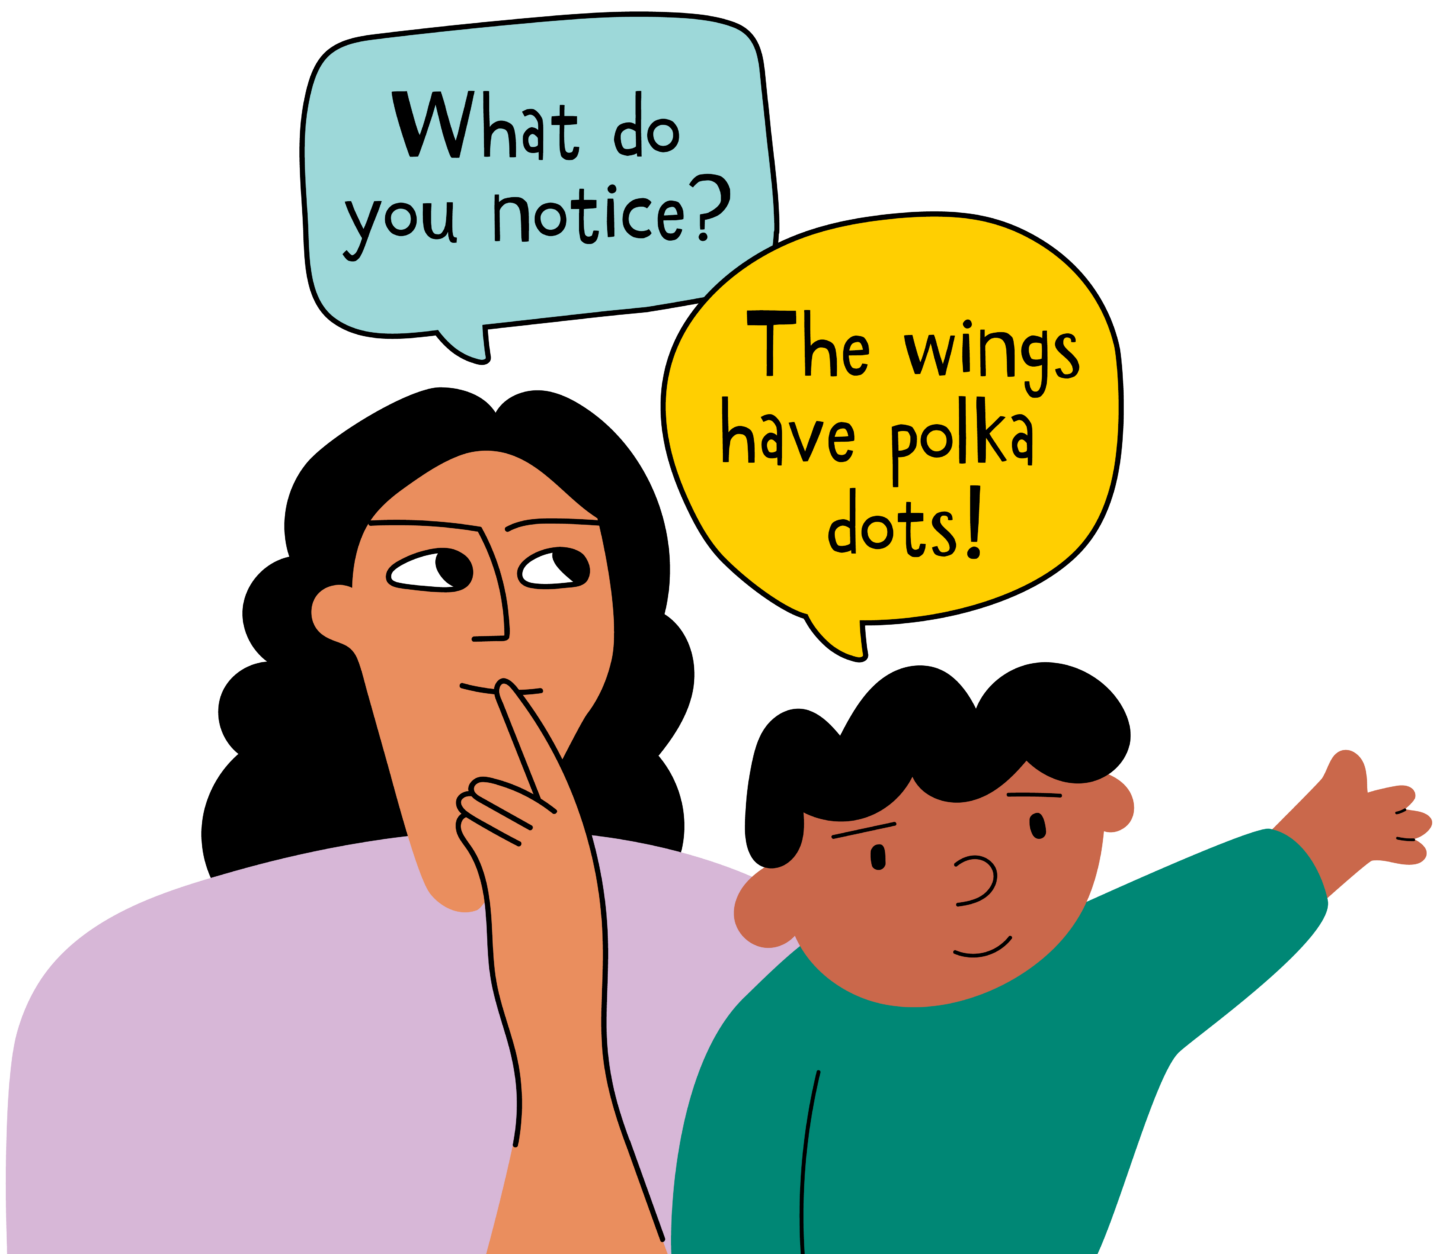 Adult asking child, "What do you notice?" and child answering, "The wings have polka dots!"